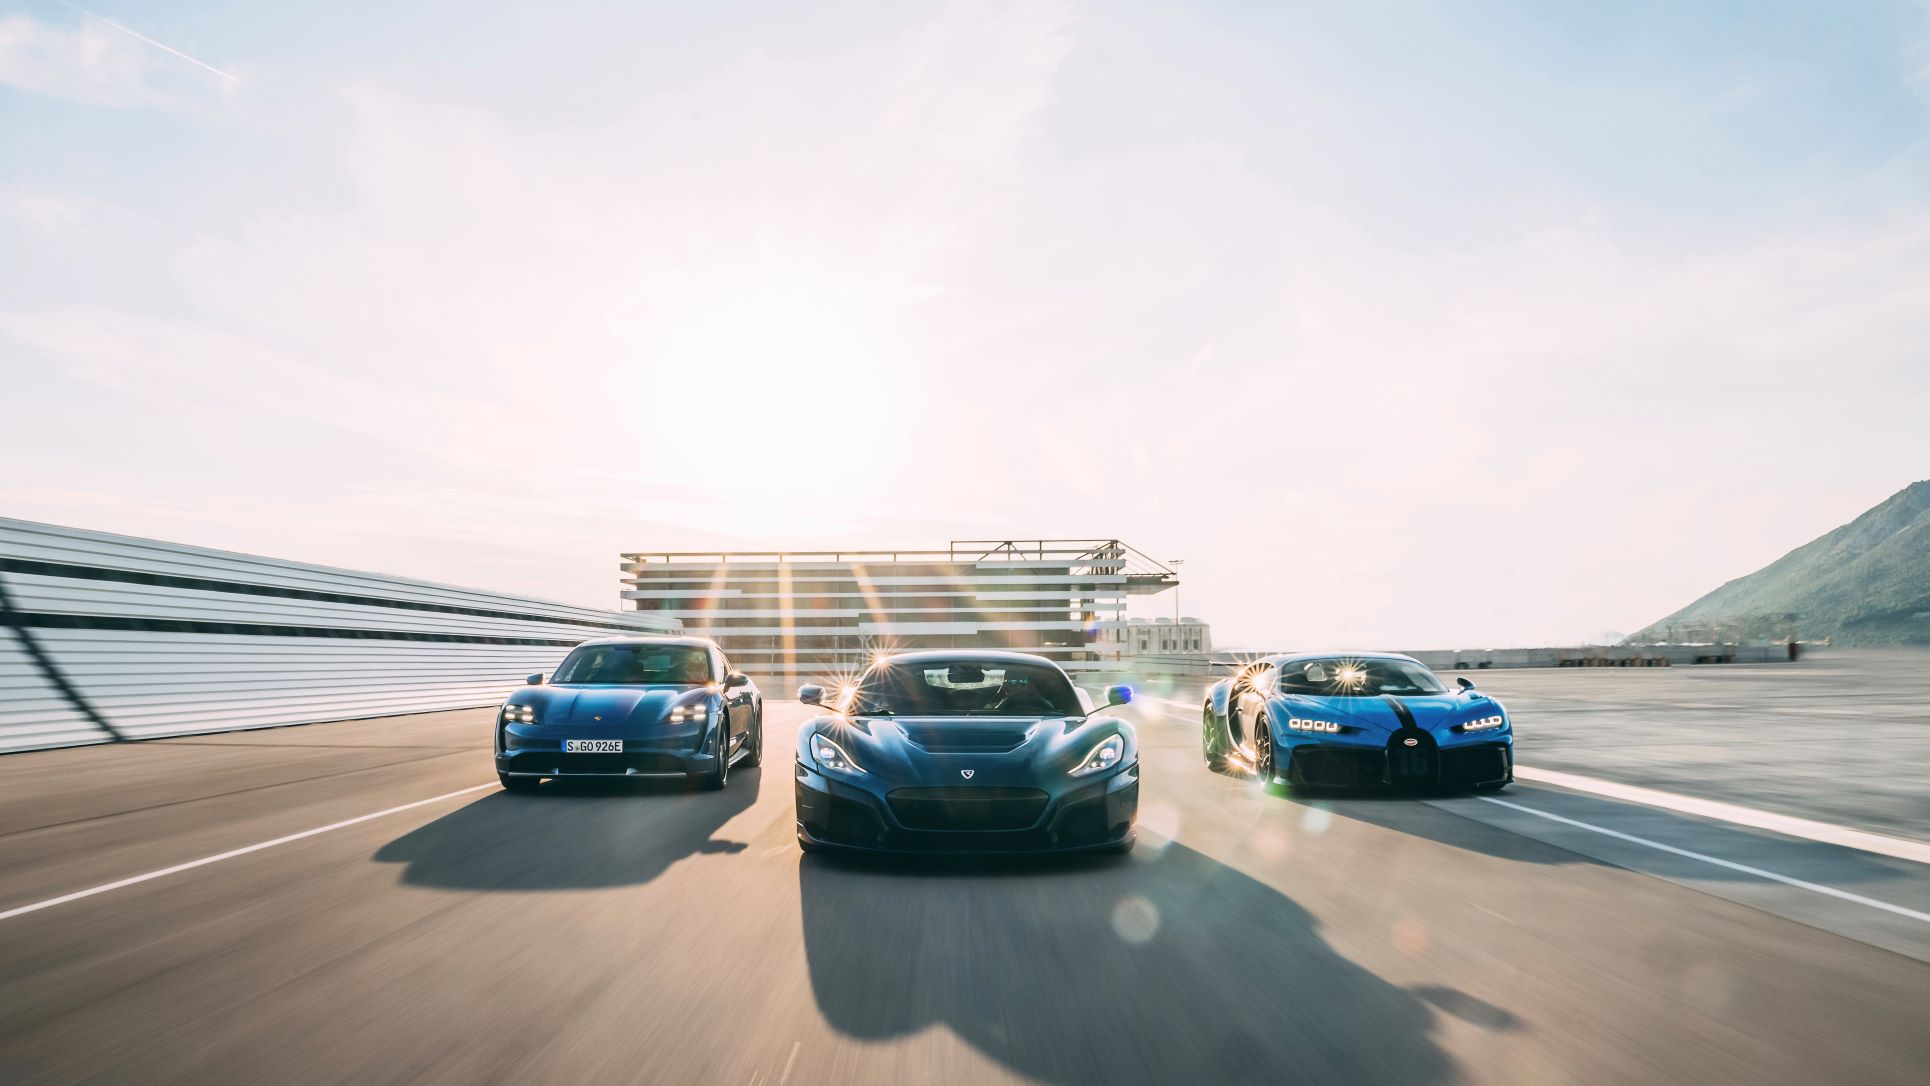 Rolling shot of cars by Porsche, Rimac and Bugatti